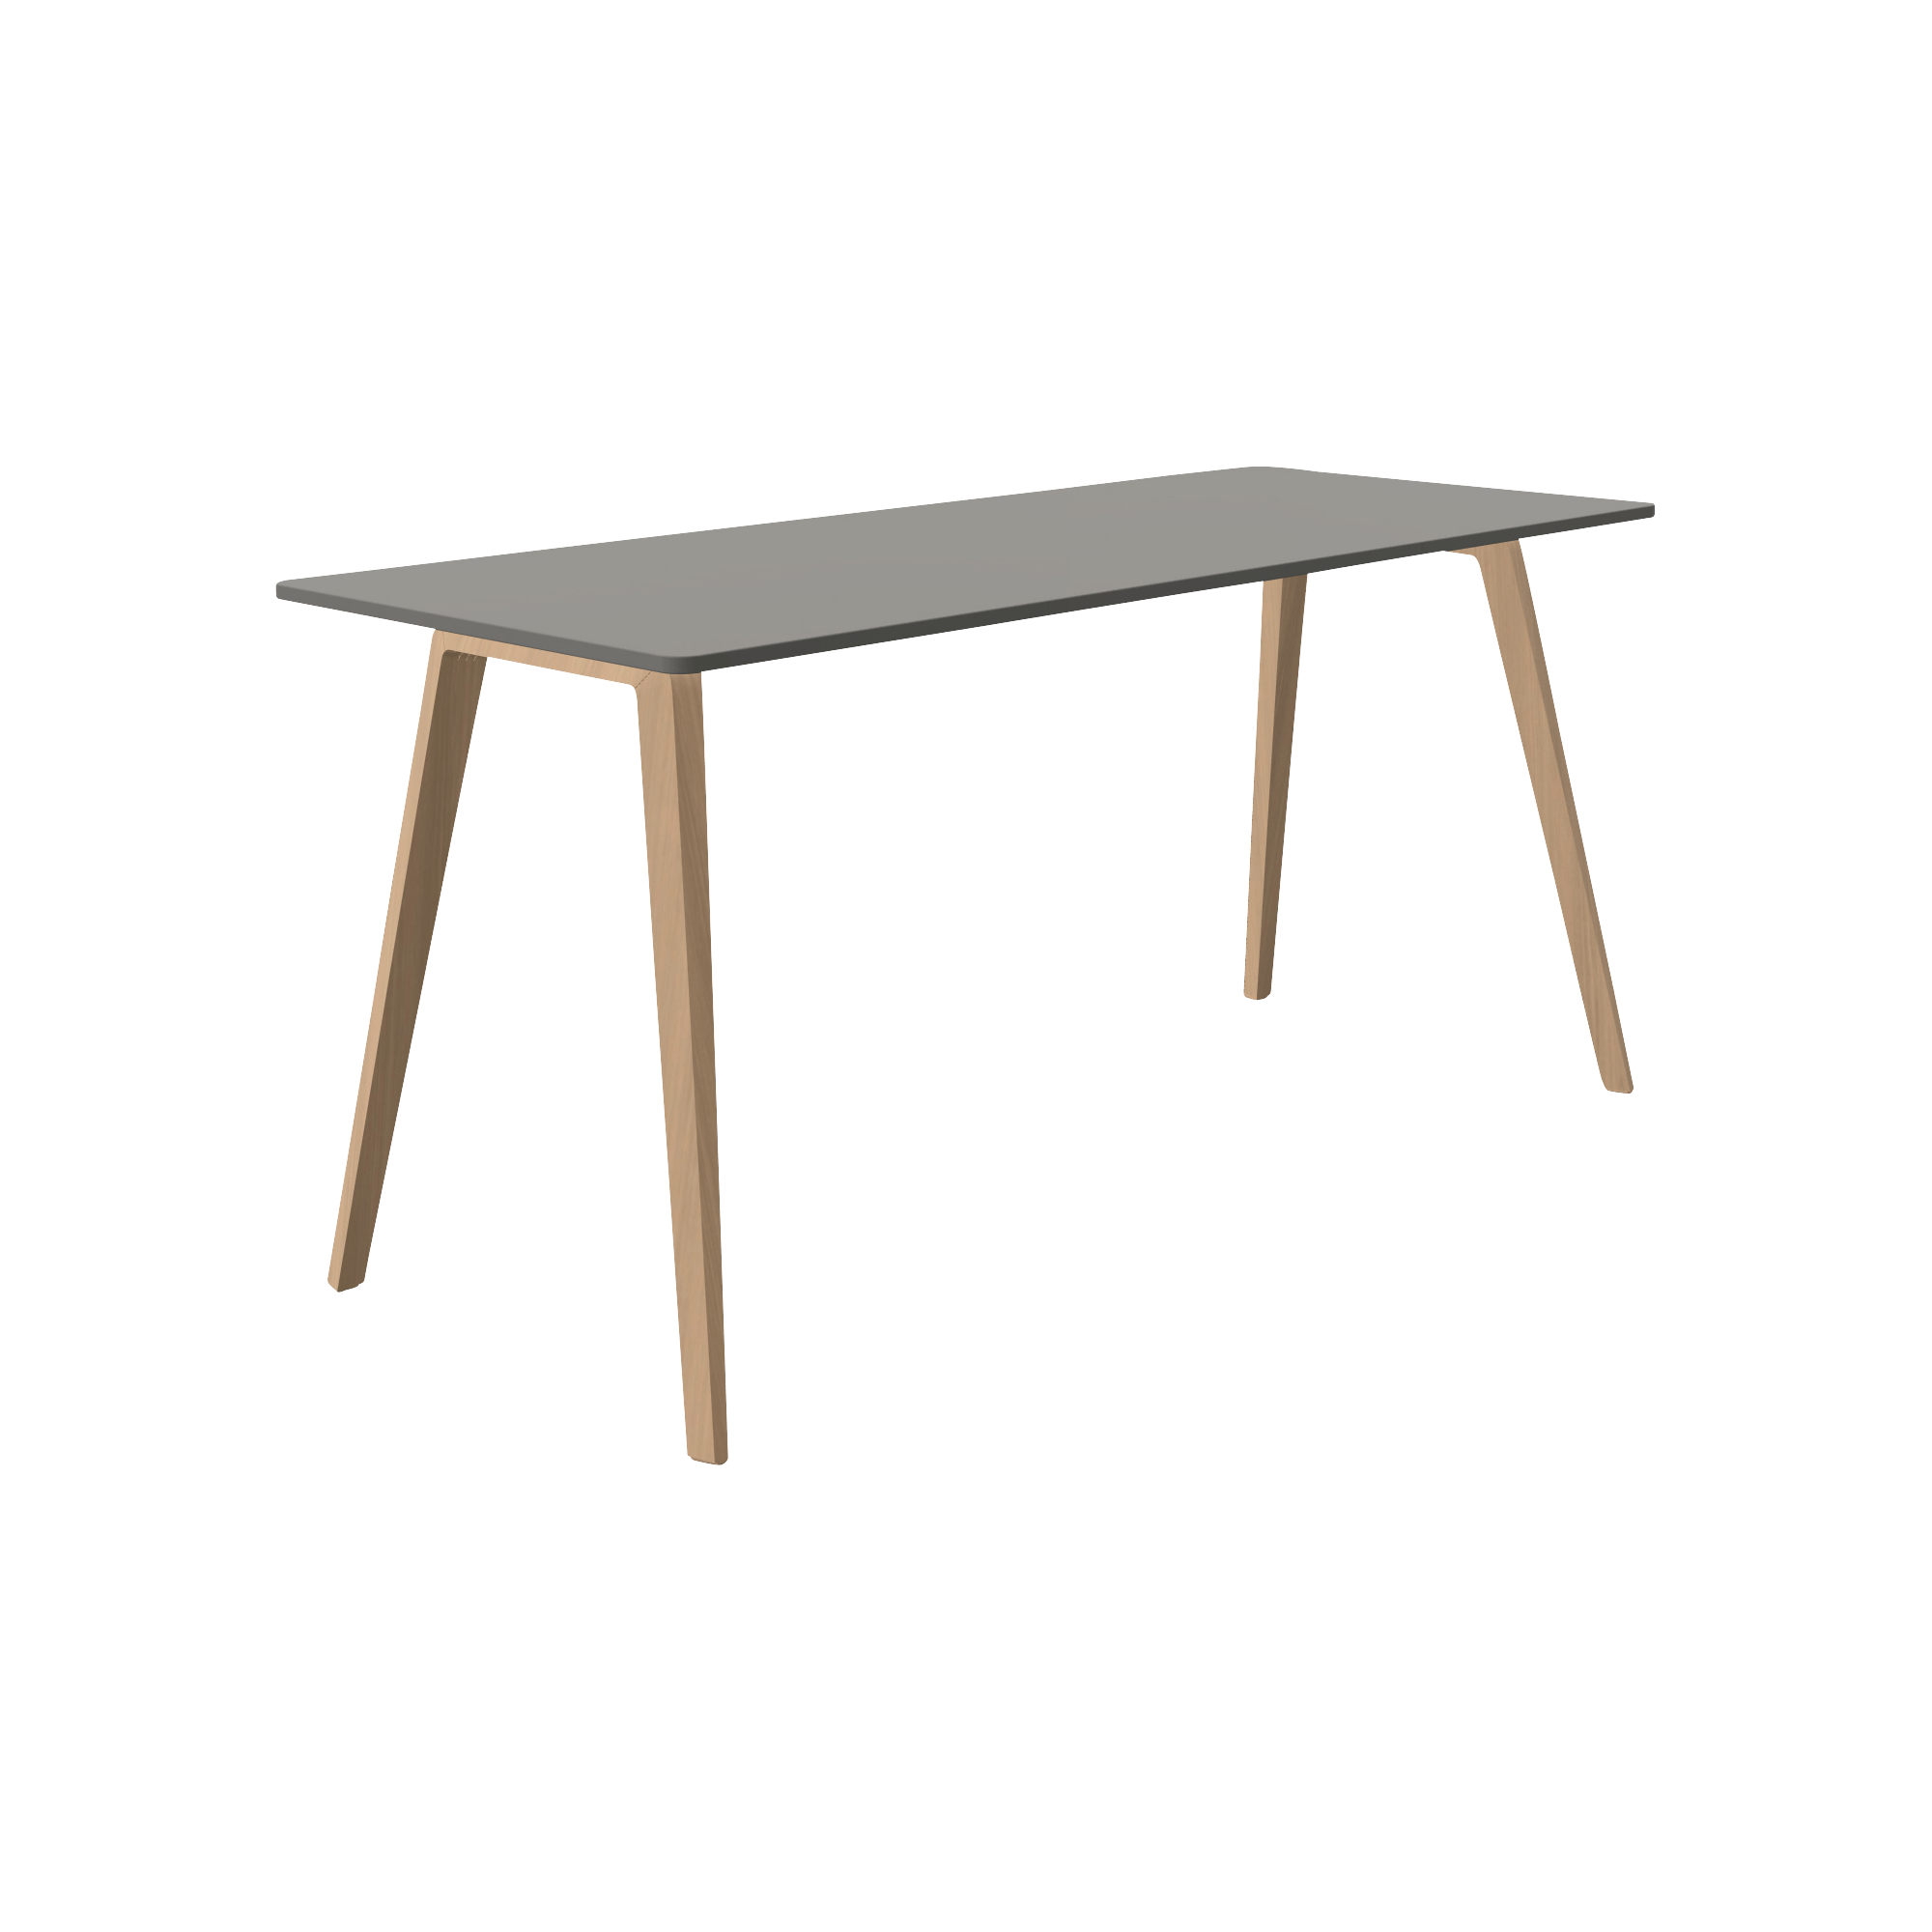 A grey table with wooden legs